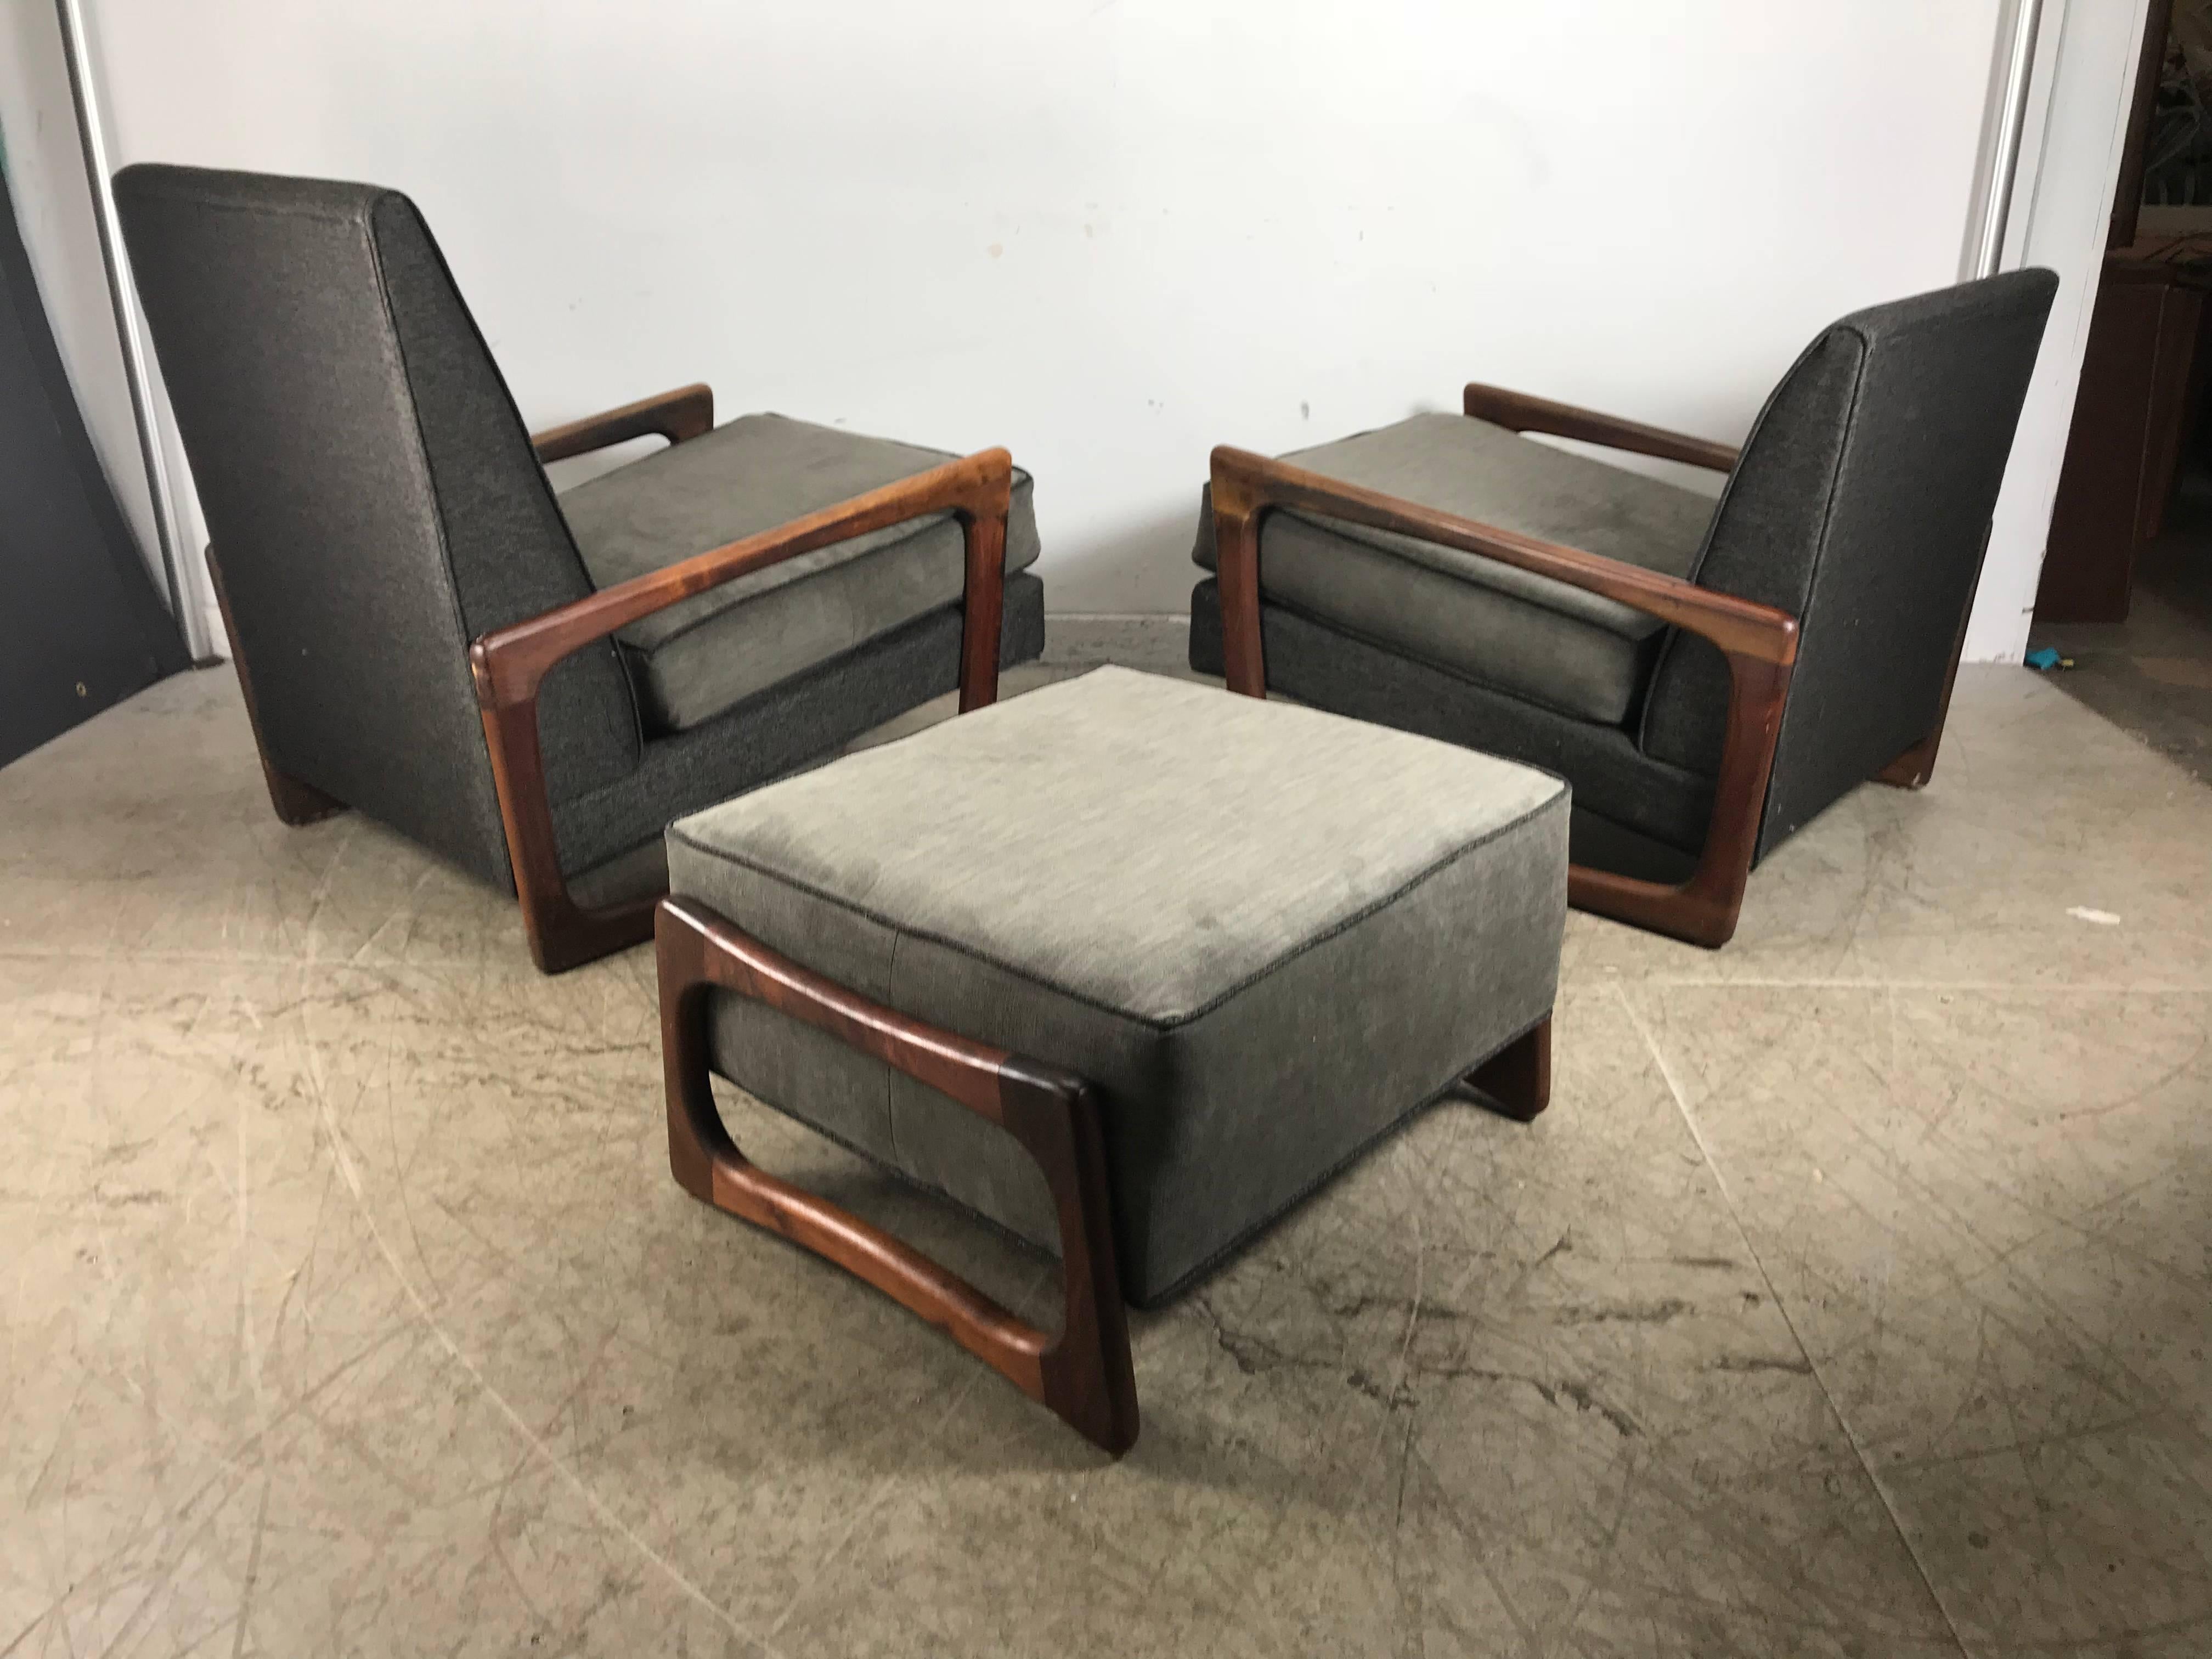 Stunning Classic Modernist Sculptural Lounge Chairs and Ottoman Adrian Pearsall 1